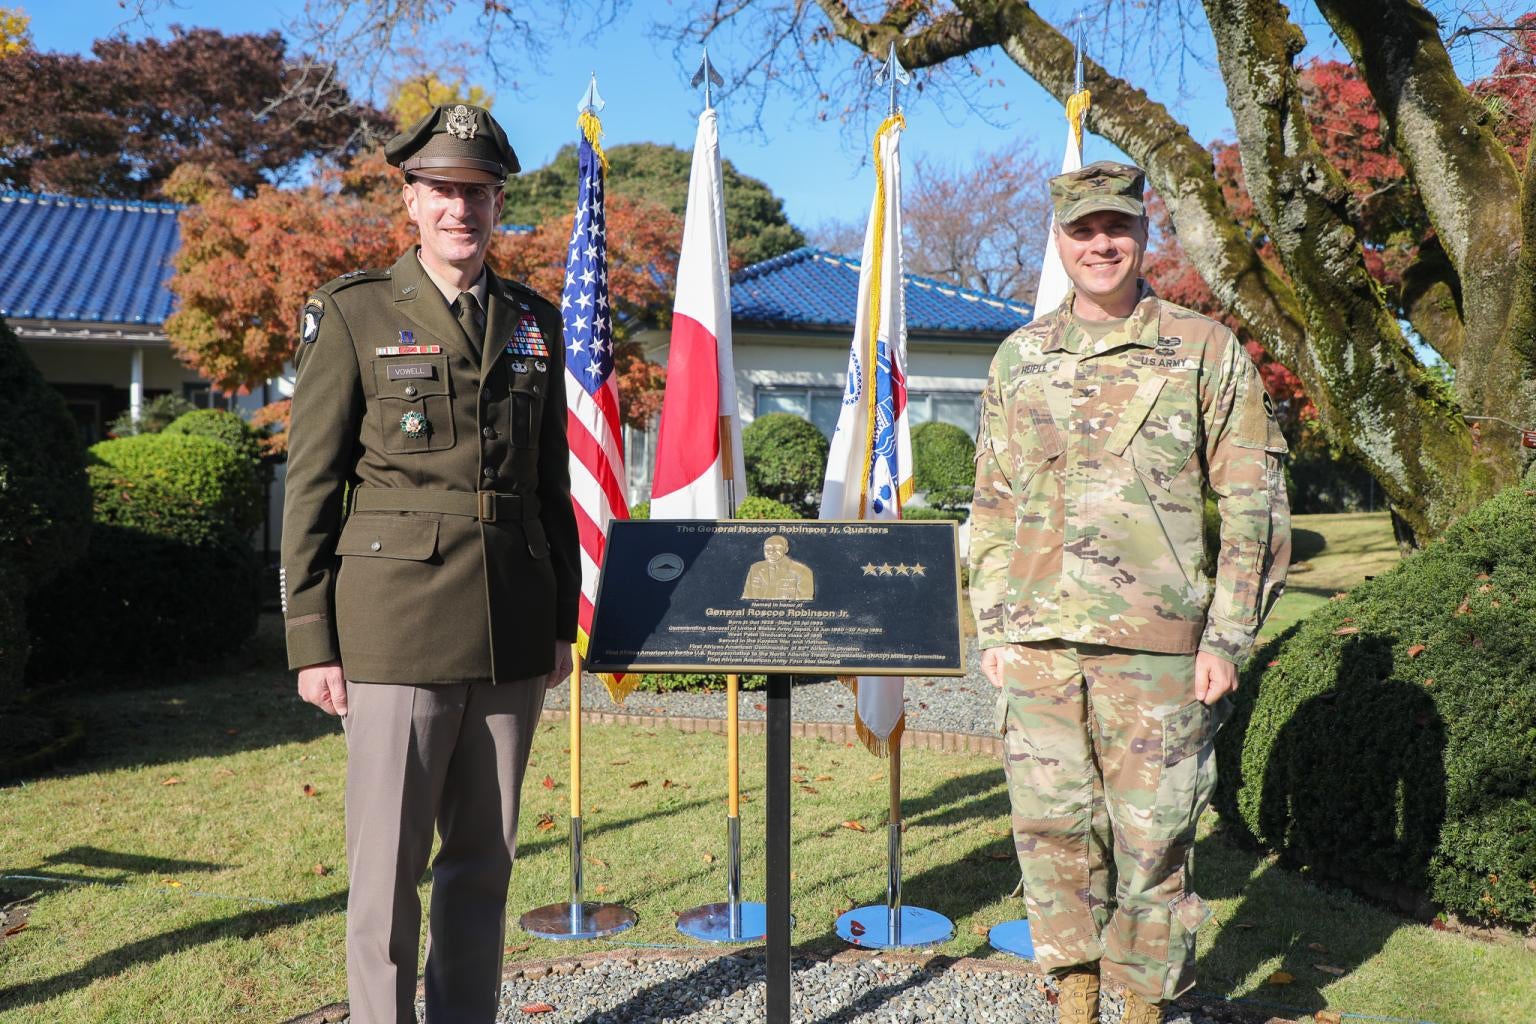 "Major General Joel “JB” Vowell, Commander of U.S. Army Japan (left) and Colonel Geoffrey Heiple, Director of Army Reserve Affairs (right), at the dedication of Quarters 1000 as The General Roscoe Robinson Jr Quarters in Japan. The two men stand outside Quarters 1000 in army uniforms around a placard with information about Roscoe Robinson."